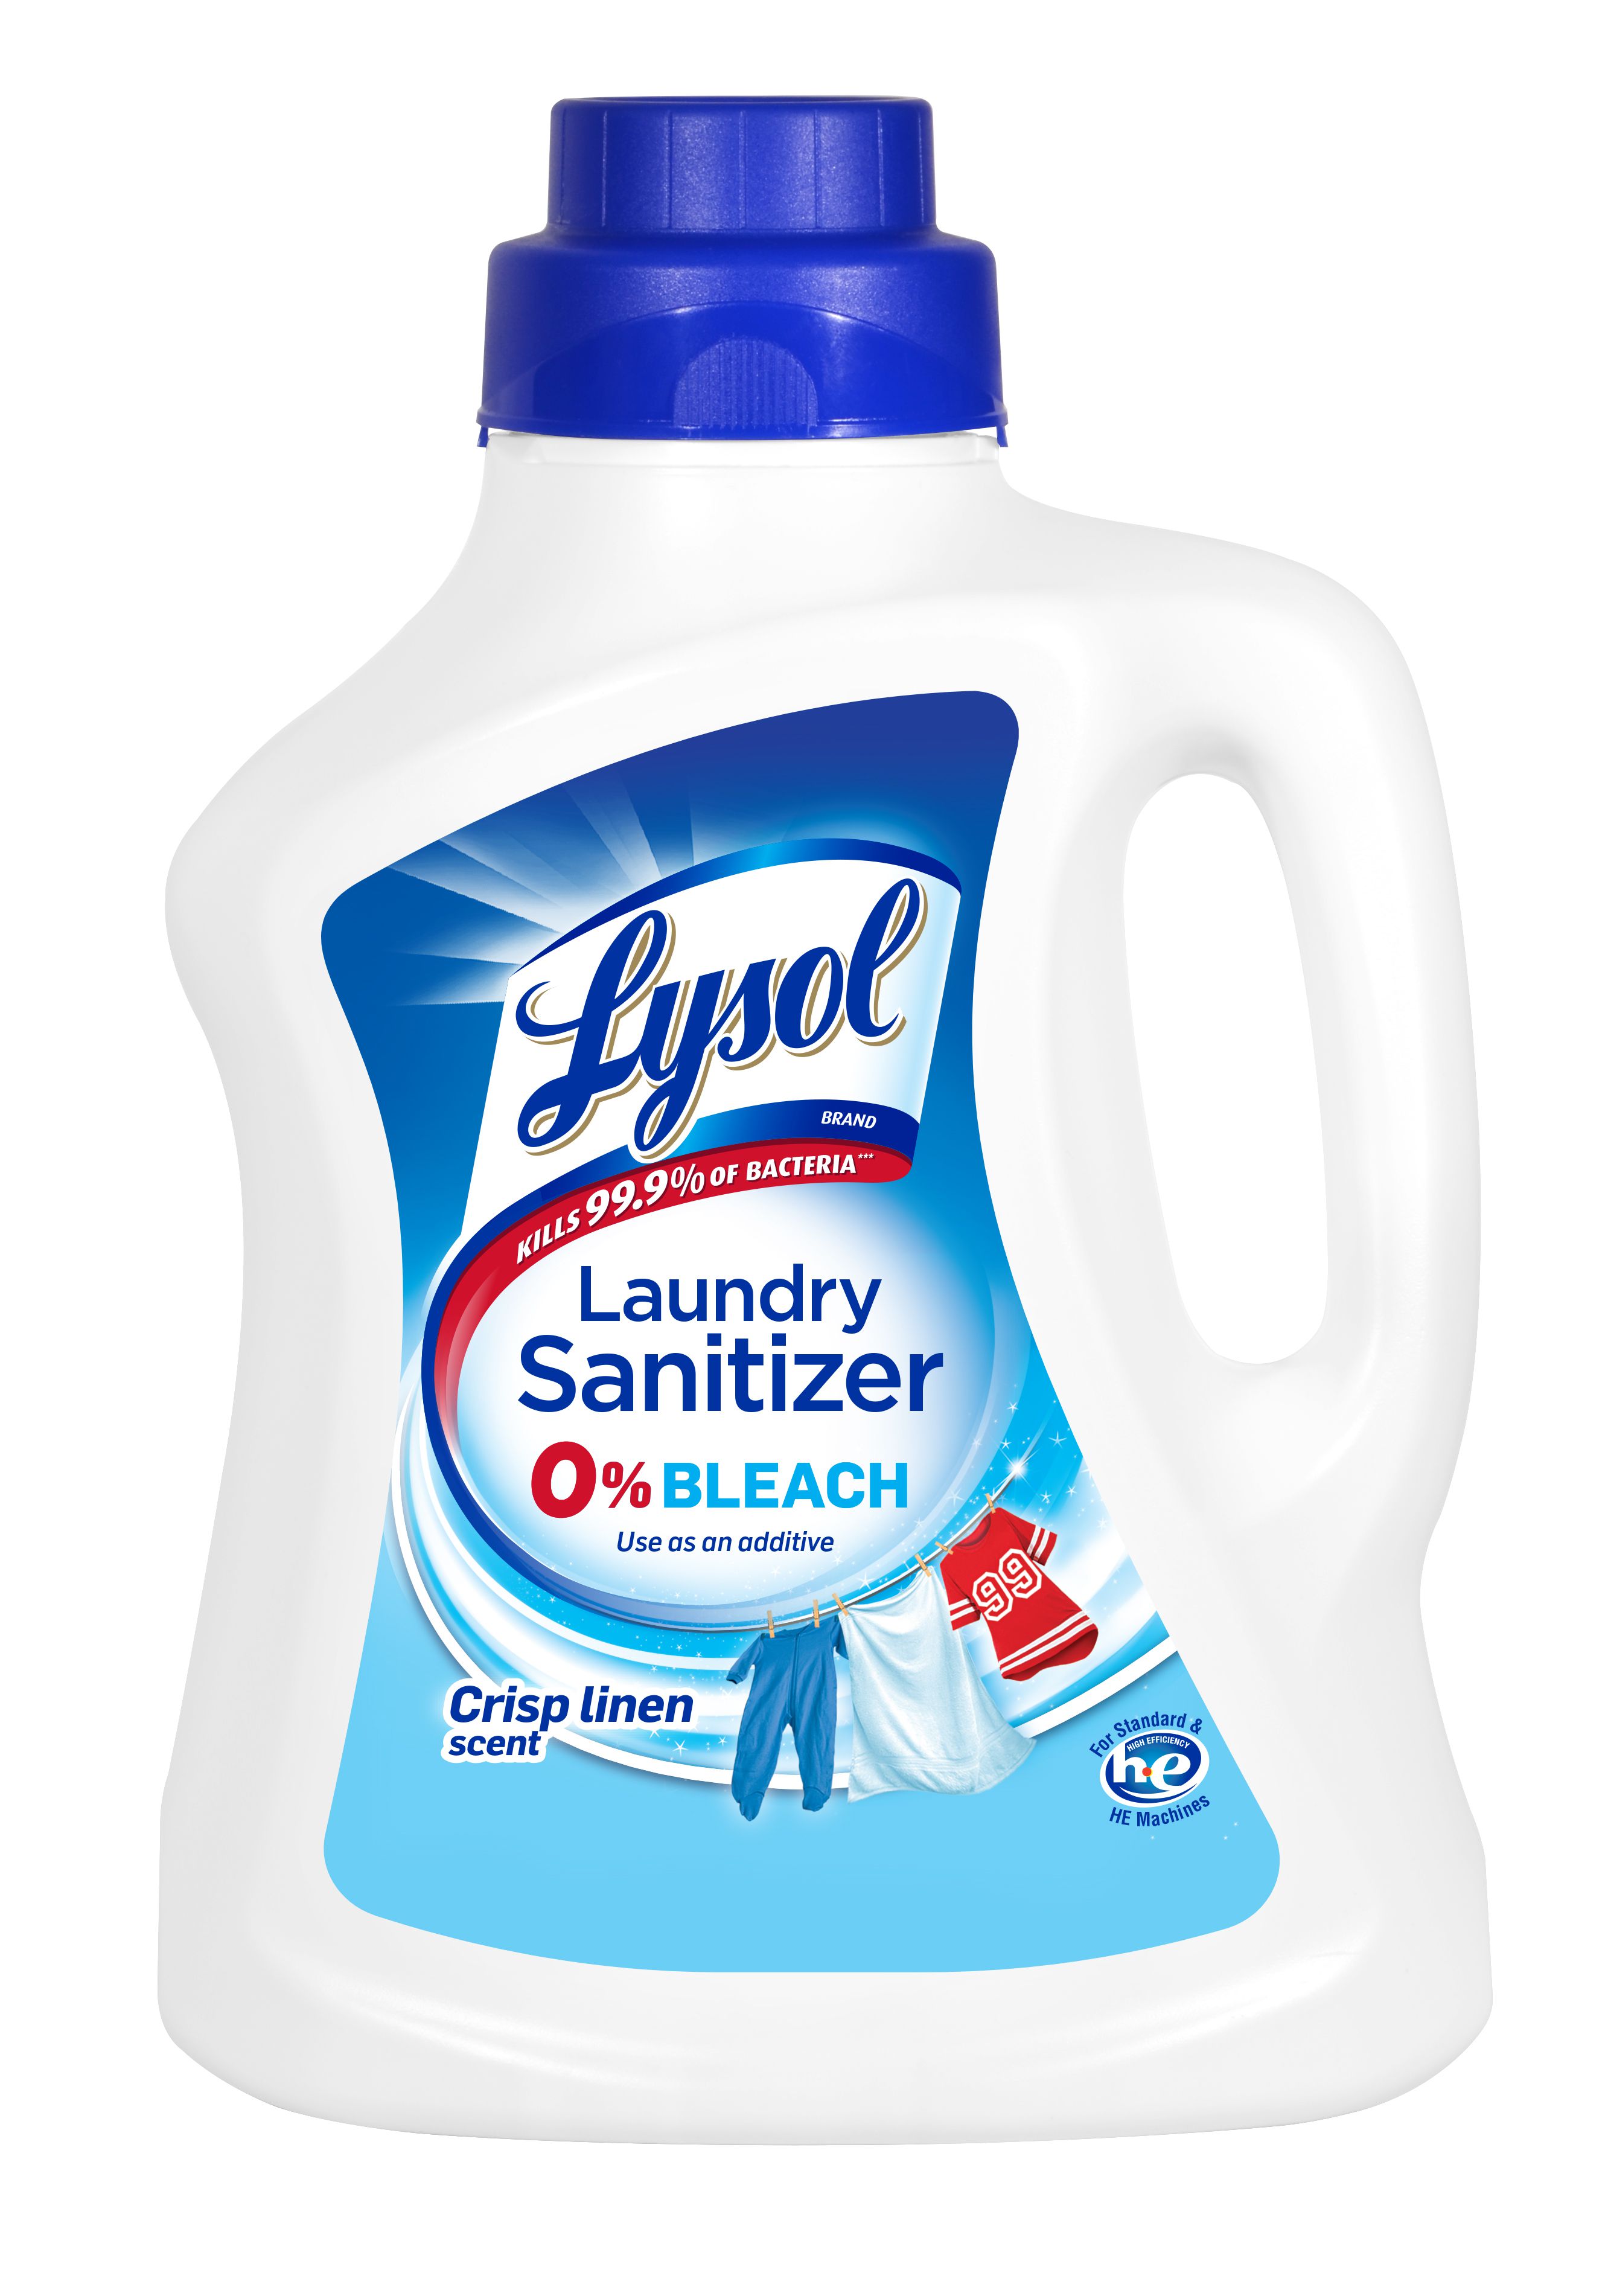 lysol laundry sanitizer in stock